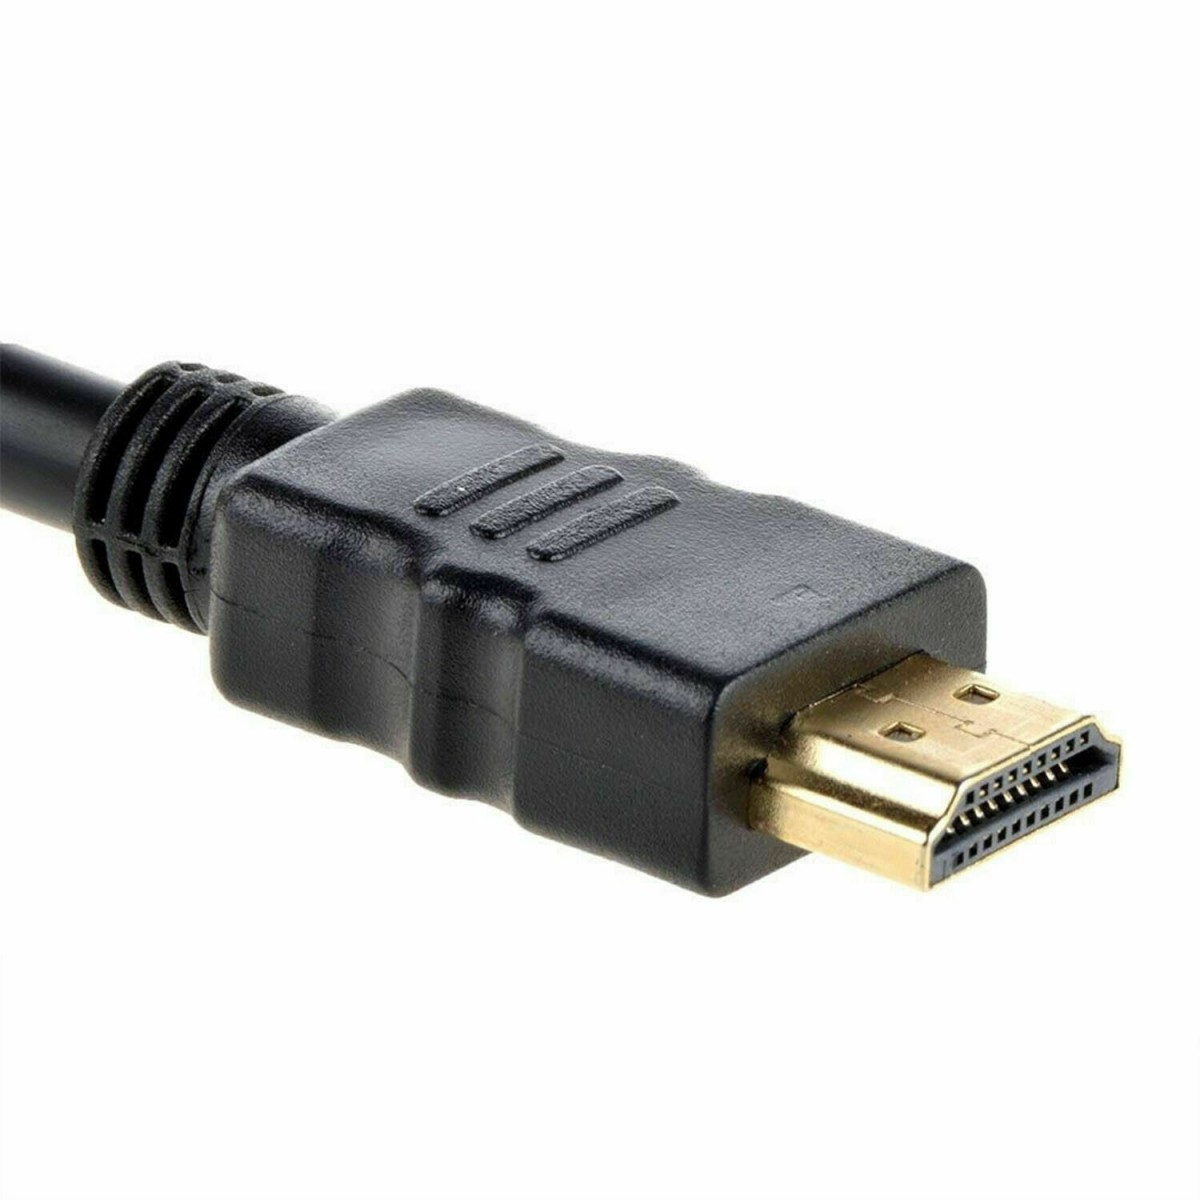 Adaptateur 2 ports Cable HDMI 1080P Gold 3D FULL HD